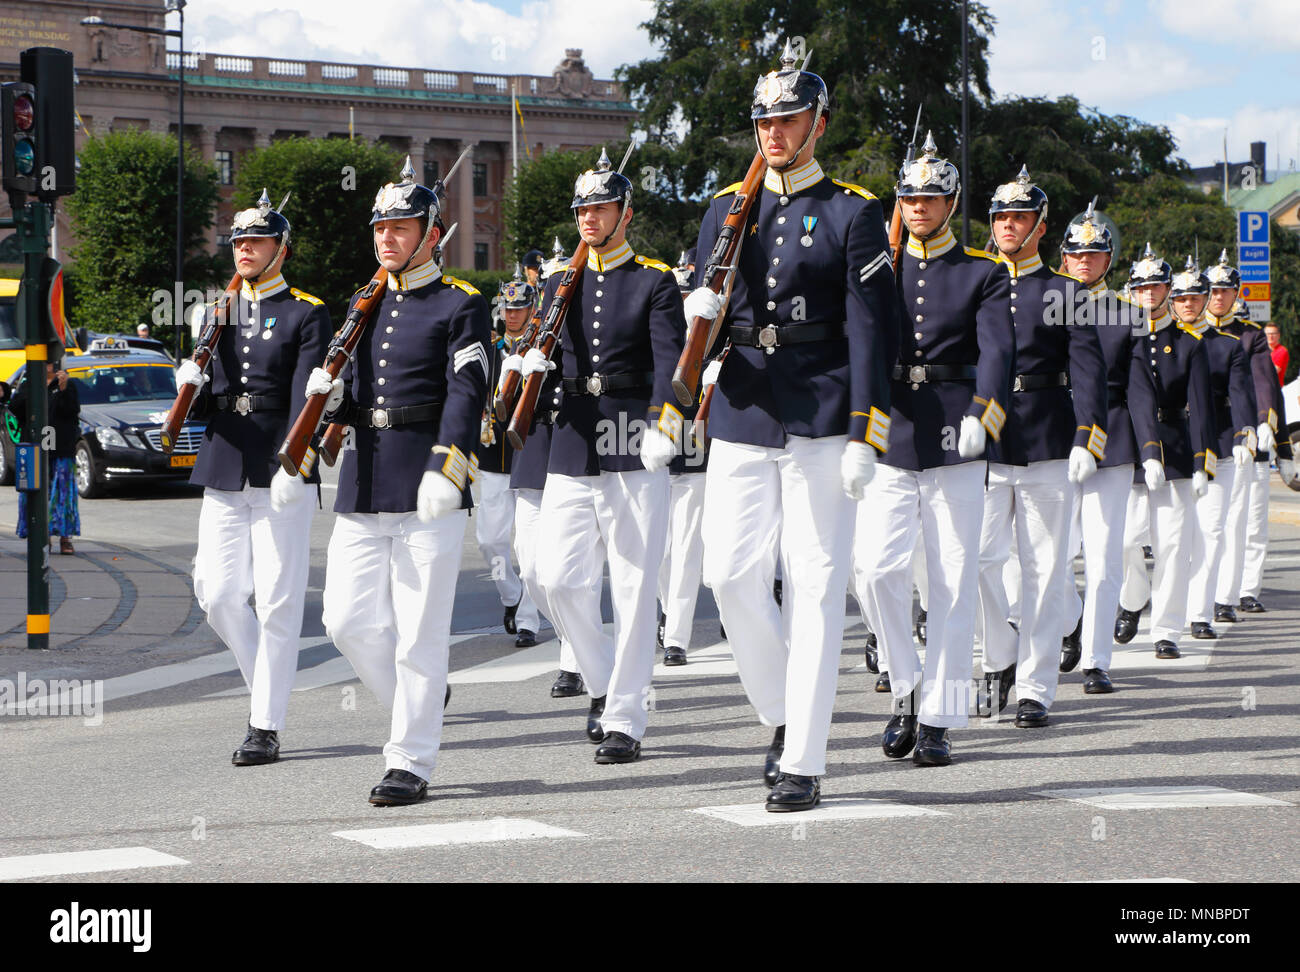 Stockholm, Sweden - August 13, 2013: The royal guards parade marching to the royal palace for change of guards cermony. Stock Photo